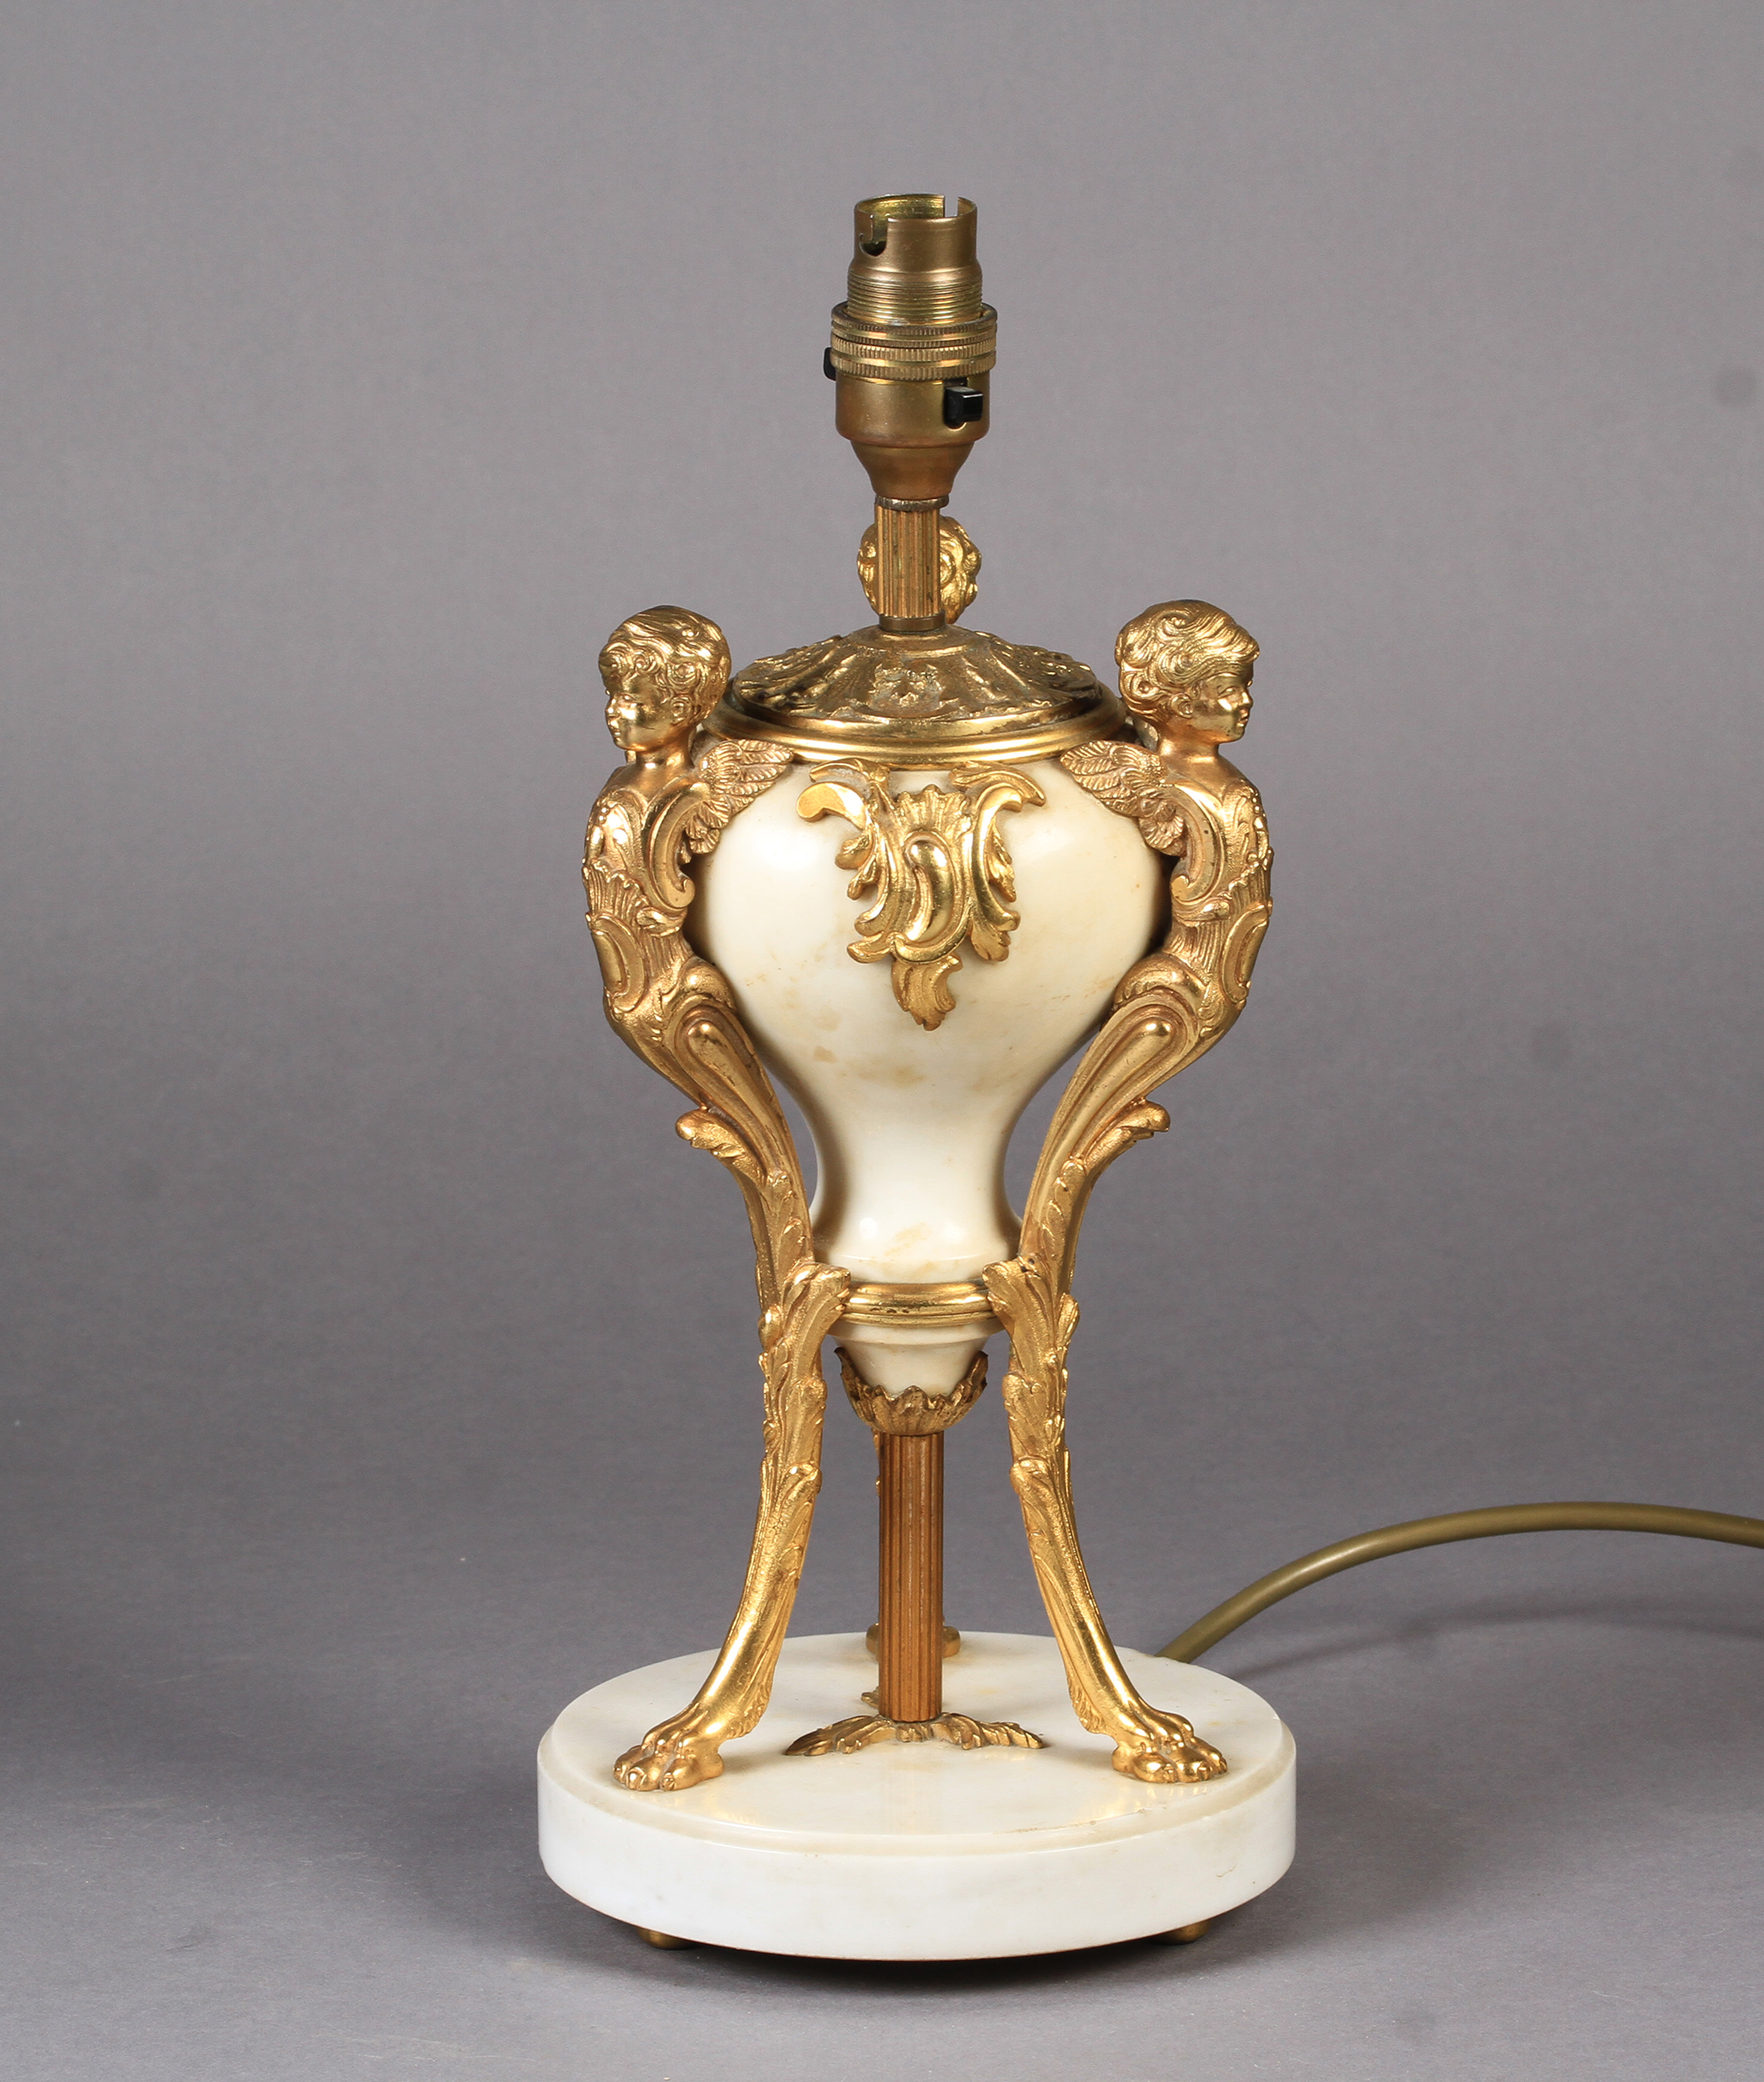 A LATE 19TH CENTURY ORMOLU MOUNTED WHITE MARBLE LAMP BASE with inverted pear shaped body, mounted